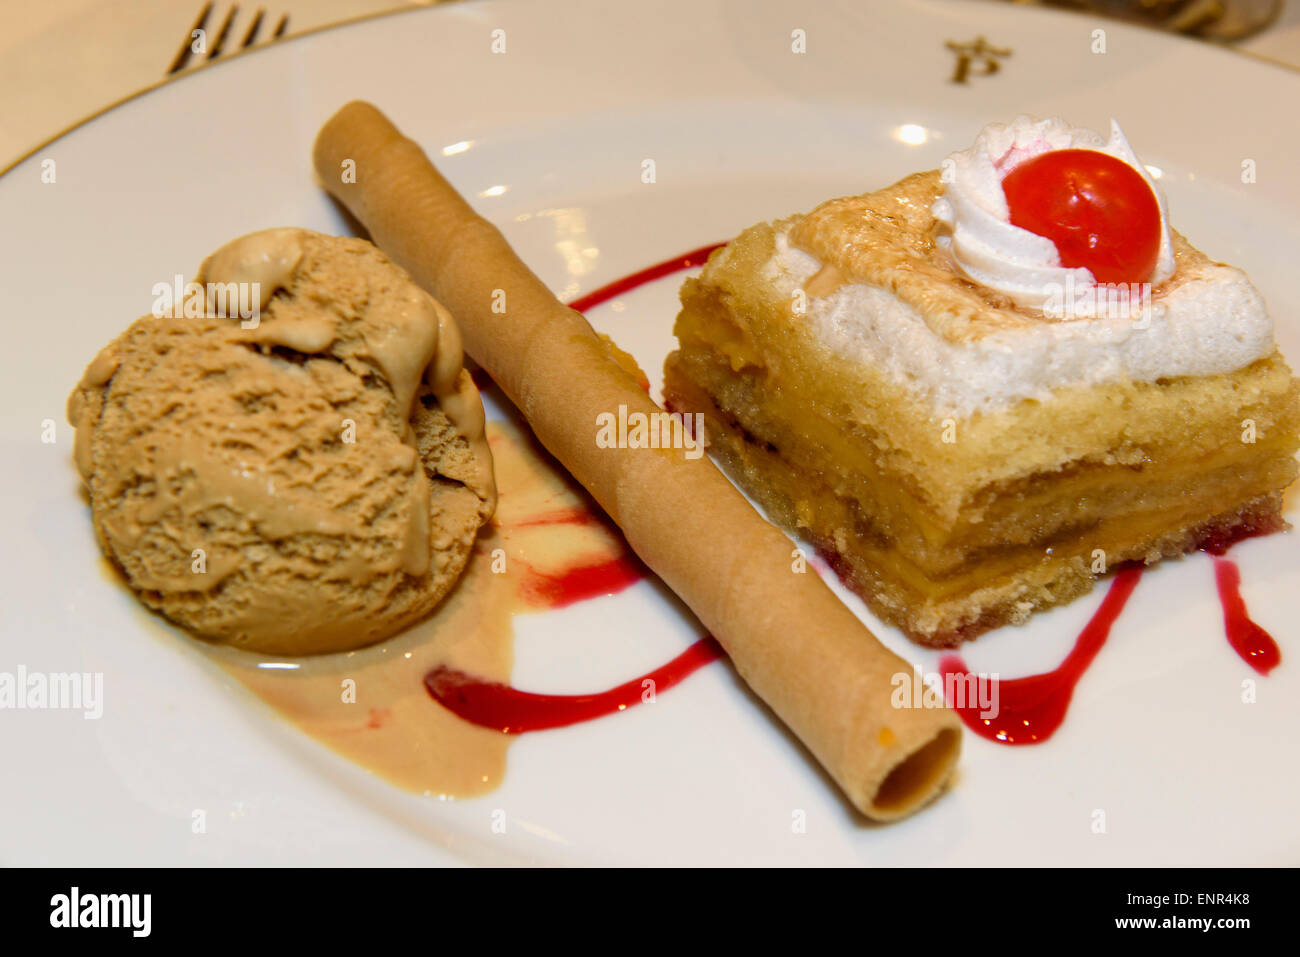 Dessert with icecream, cookie and sweet cake, province Murcia, Spain Stock Photo